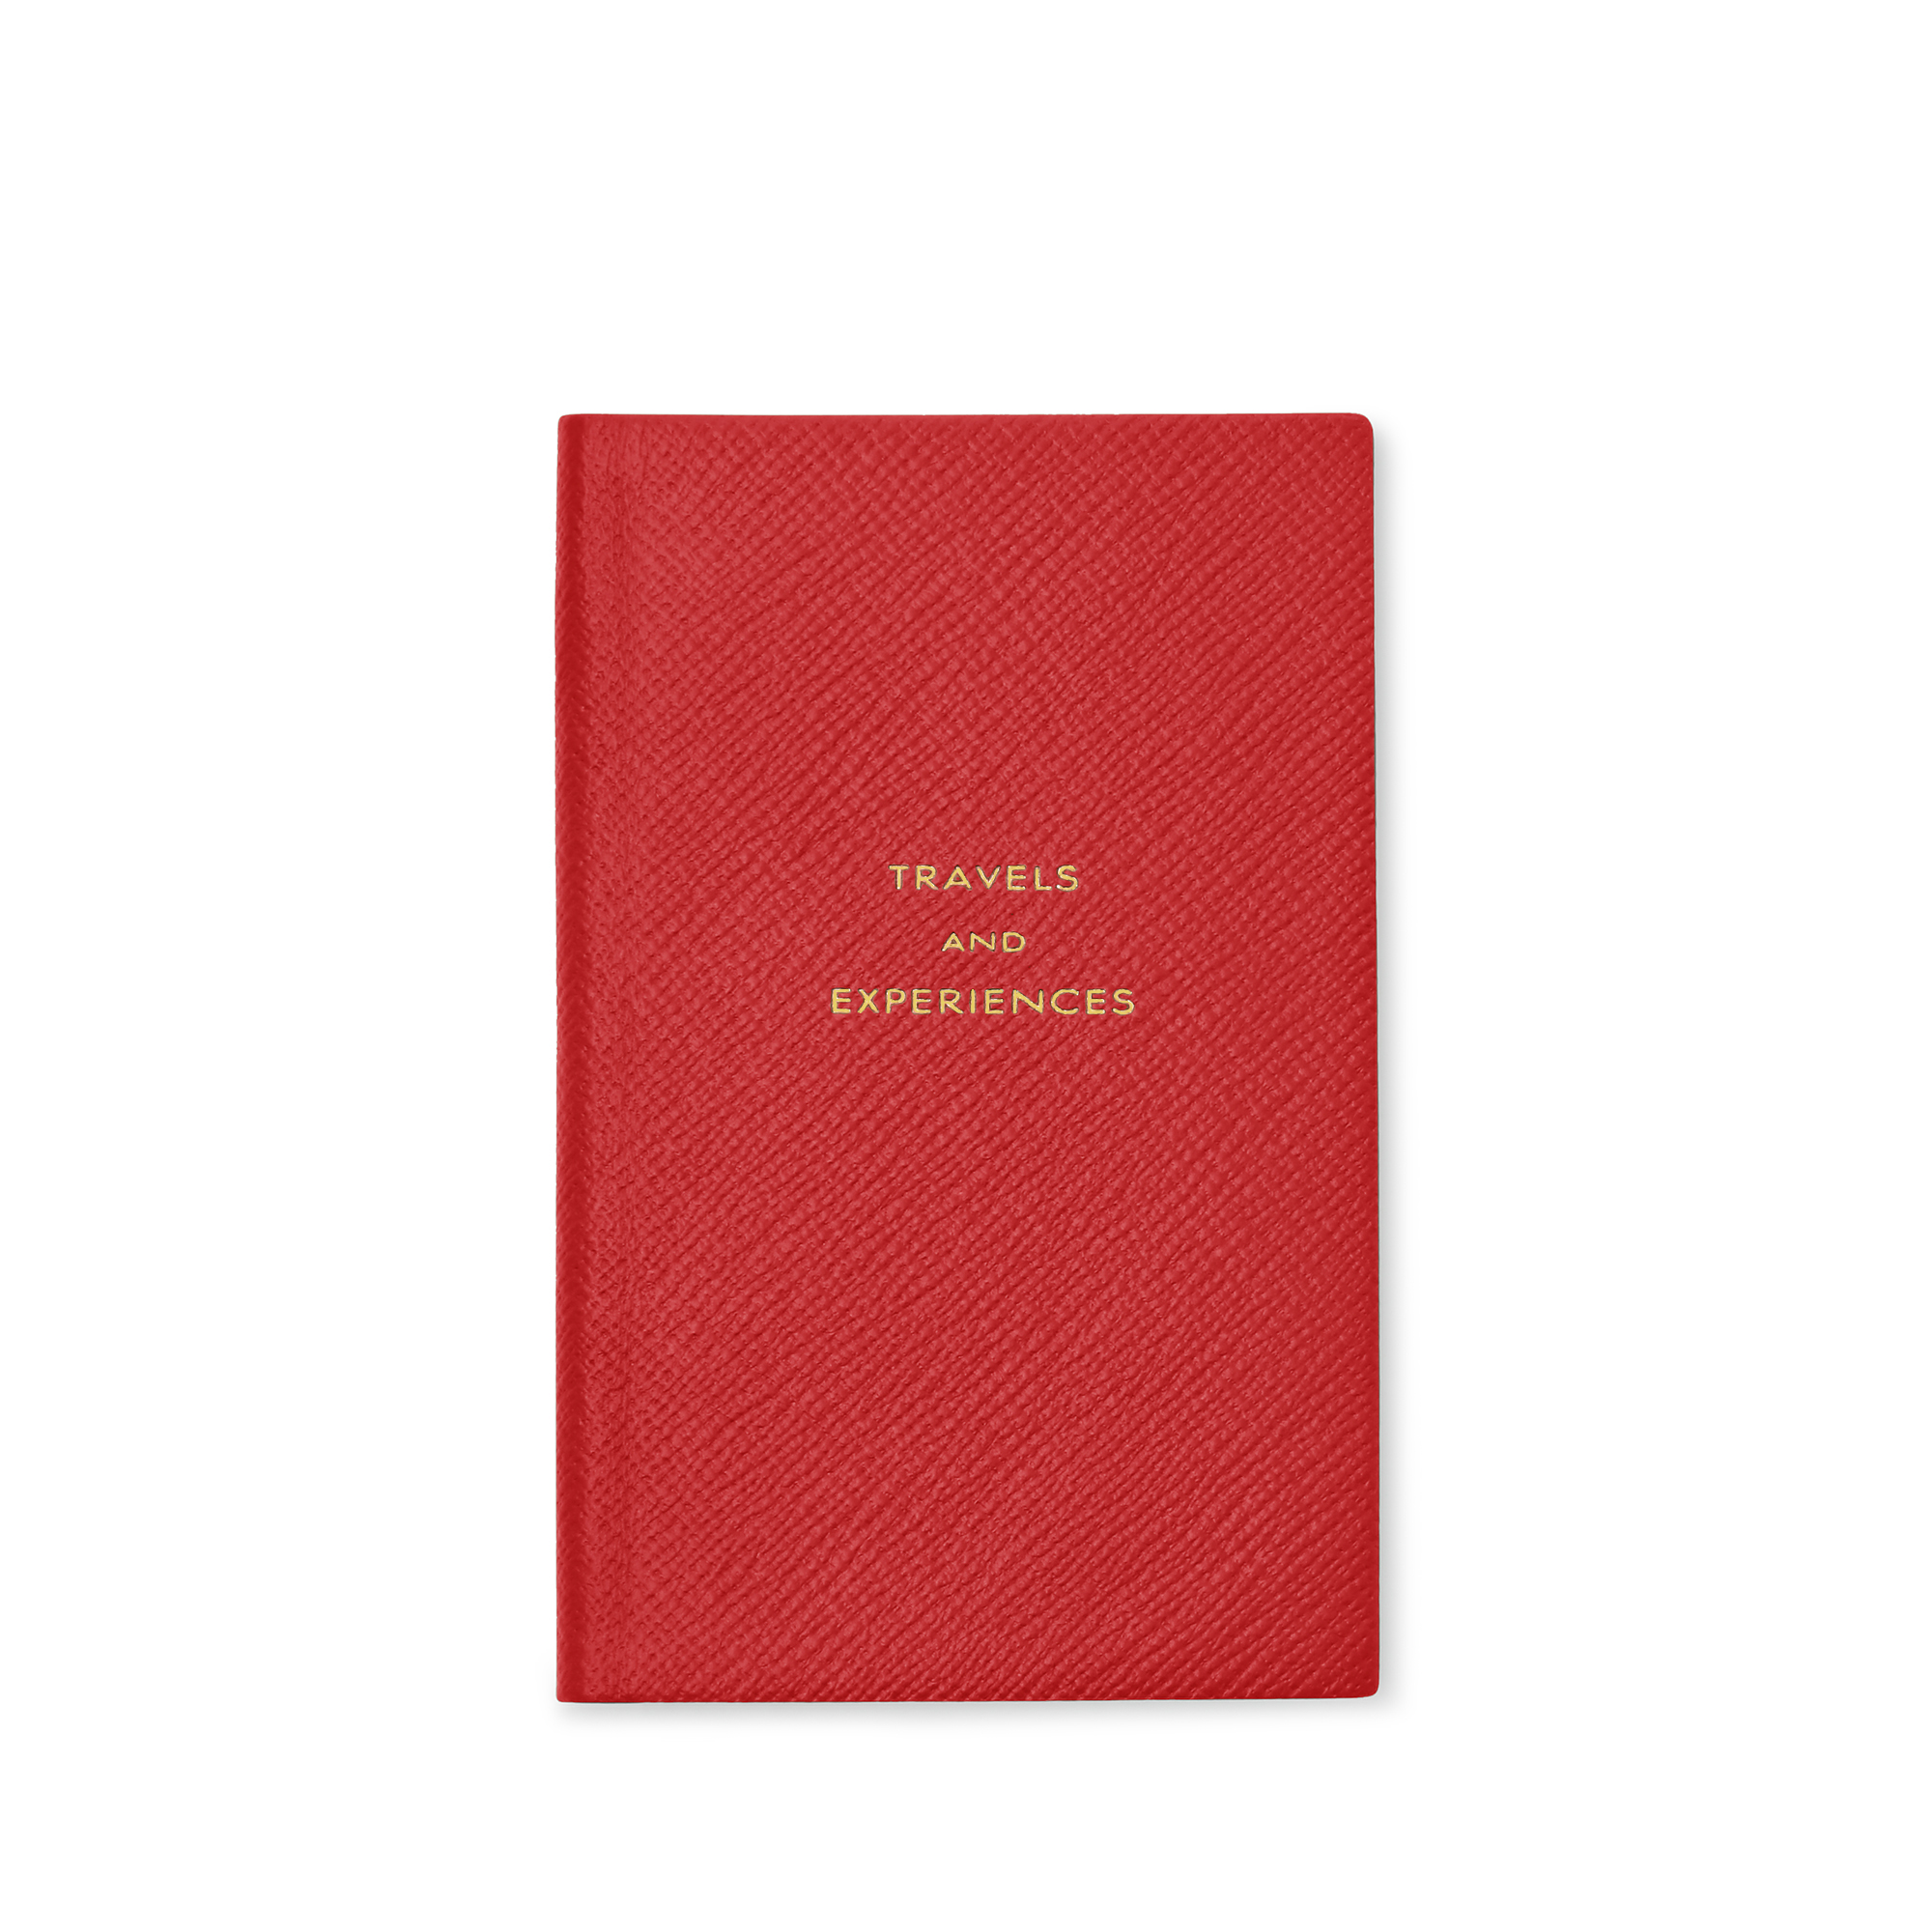 Luxury Notebook Smythson of Bond Street With Leather Cover 